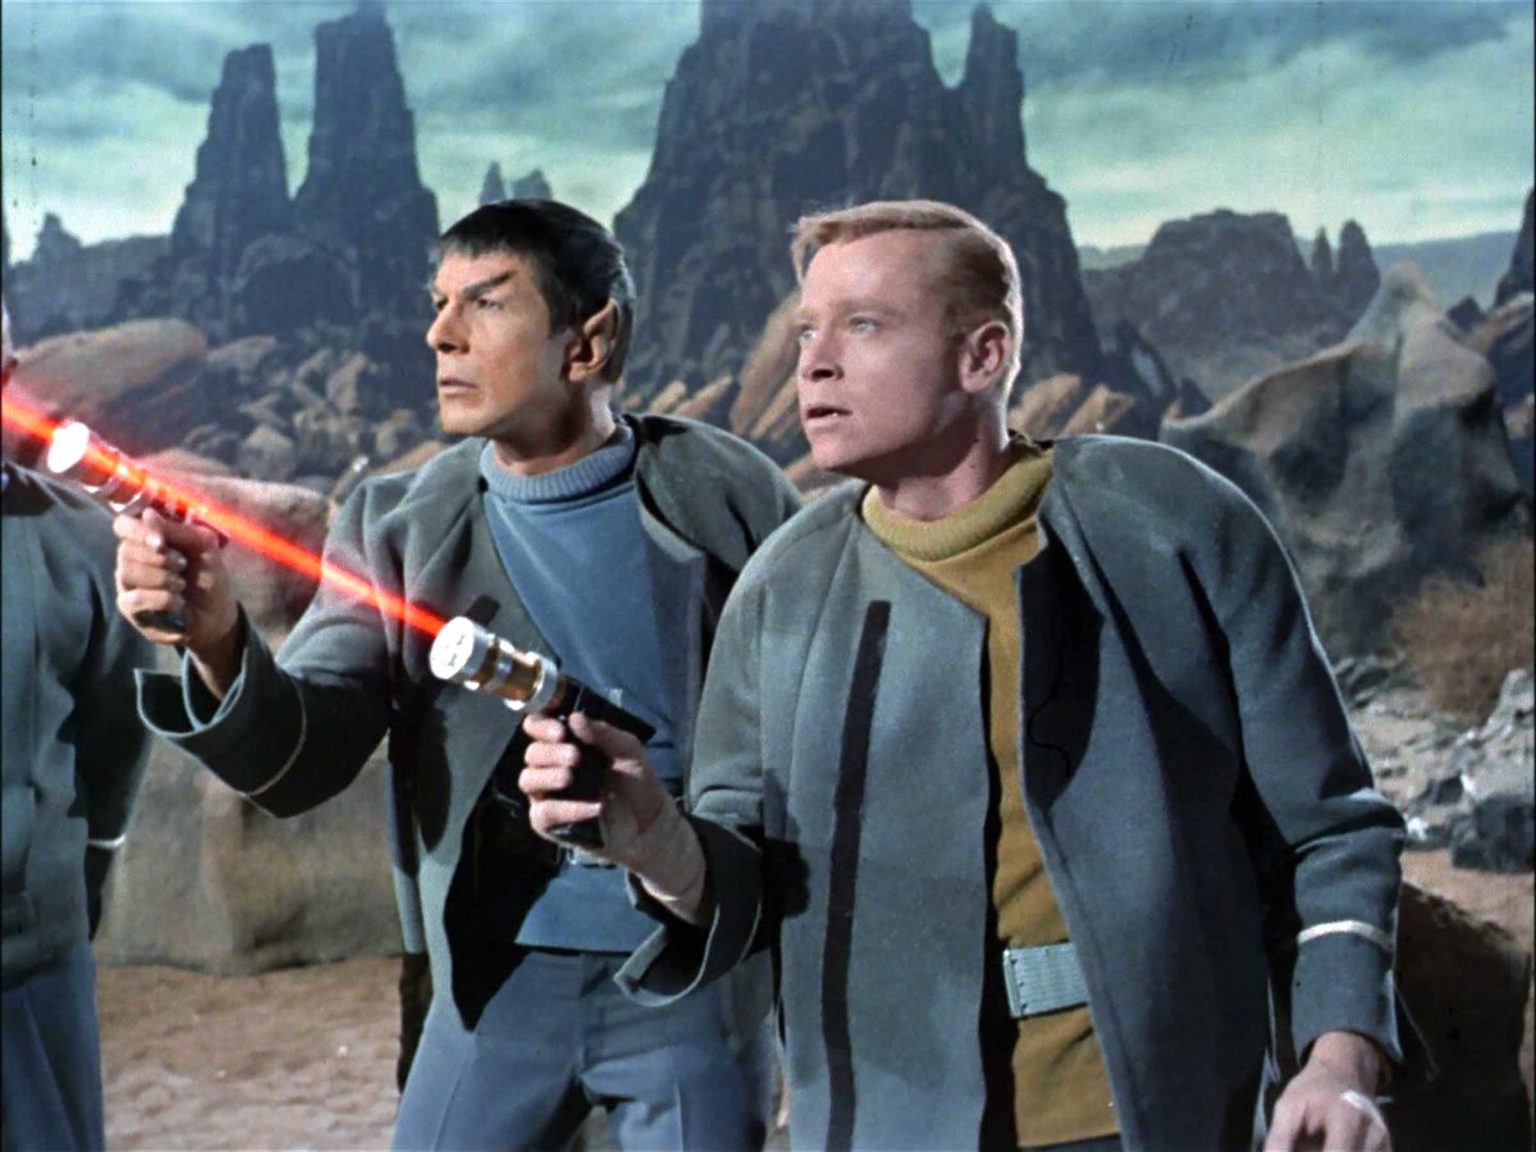 'Star Trek' is jam-packed with villains. In honor of this incredible catalog of villainy, here's are our favorites from the earliest generation to the next.